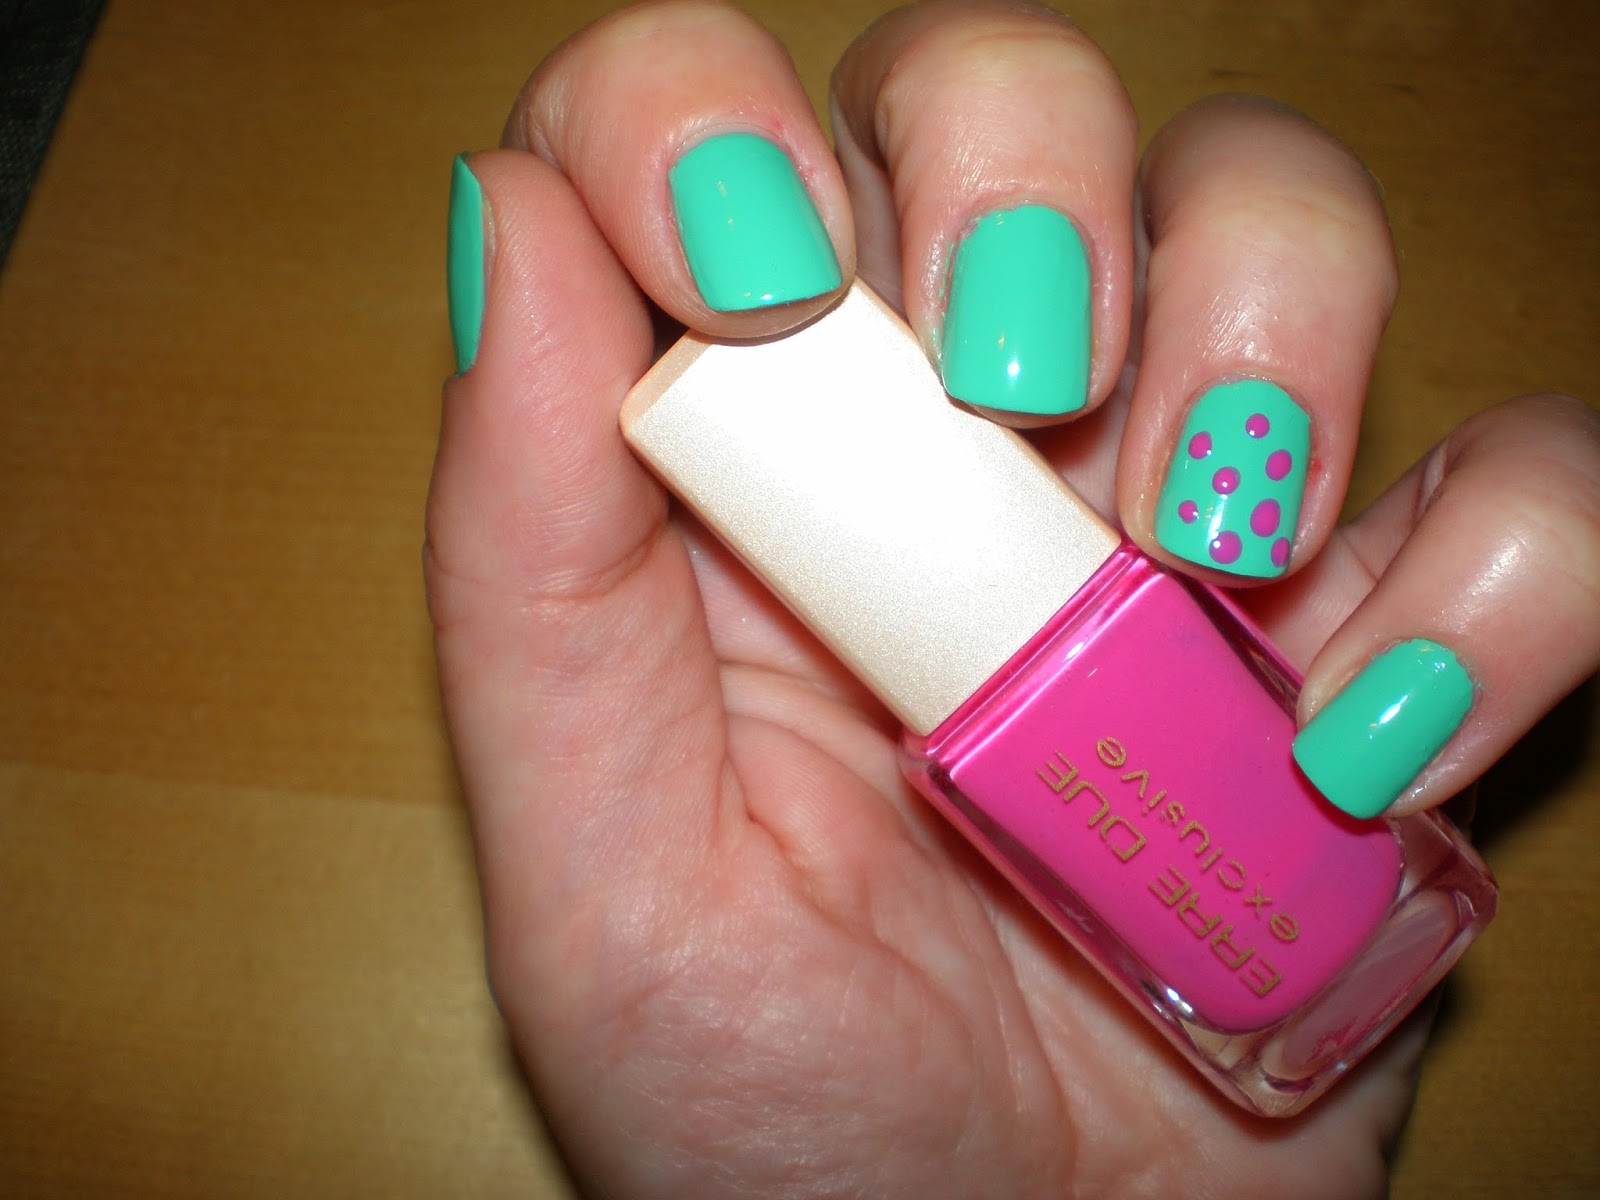 Manicure using Jessica Dynamite Teal and polka dots made using Erre Due #117